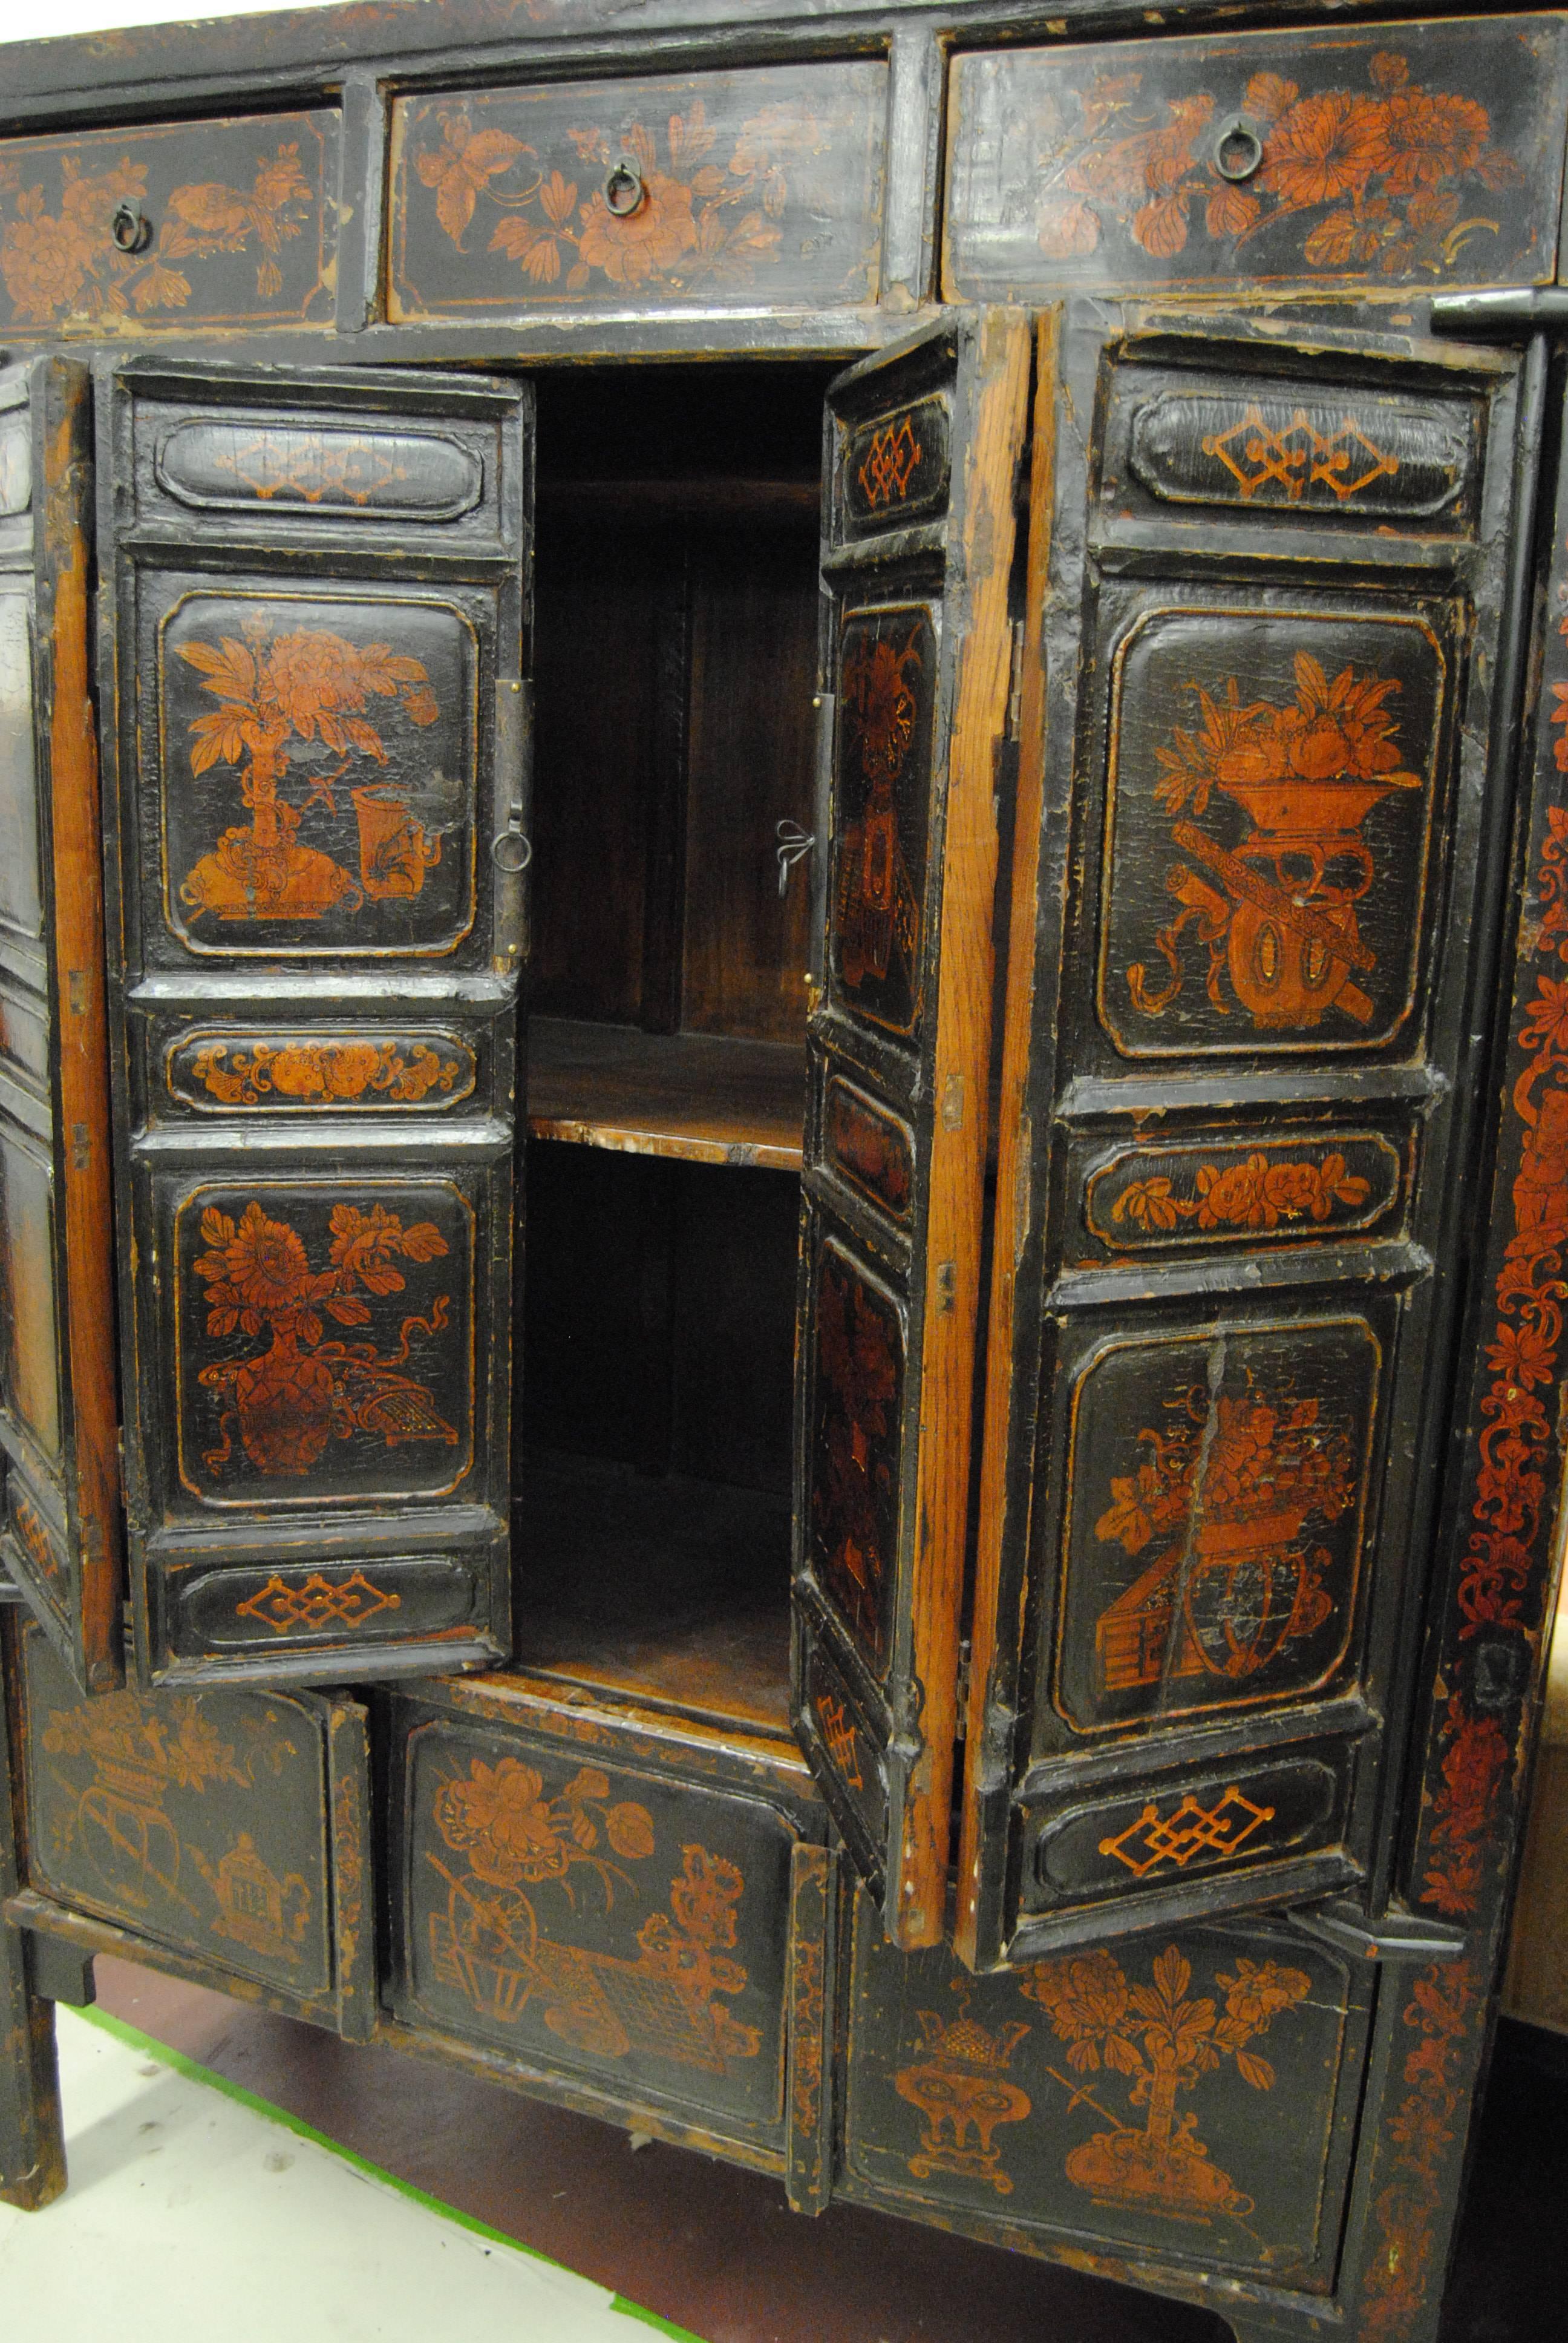 Wood Antique Large Chinese Armoire with Original Lacquer, Shanxi Province, Early 1800